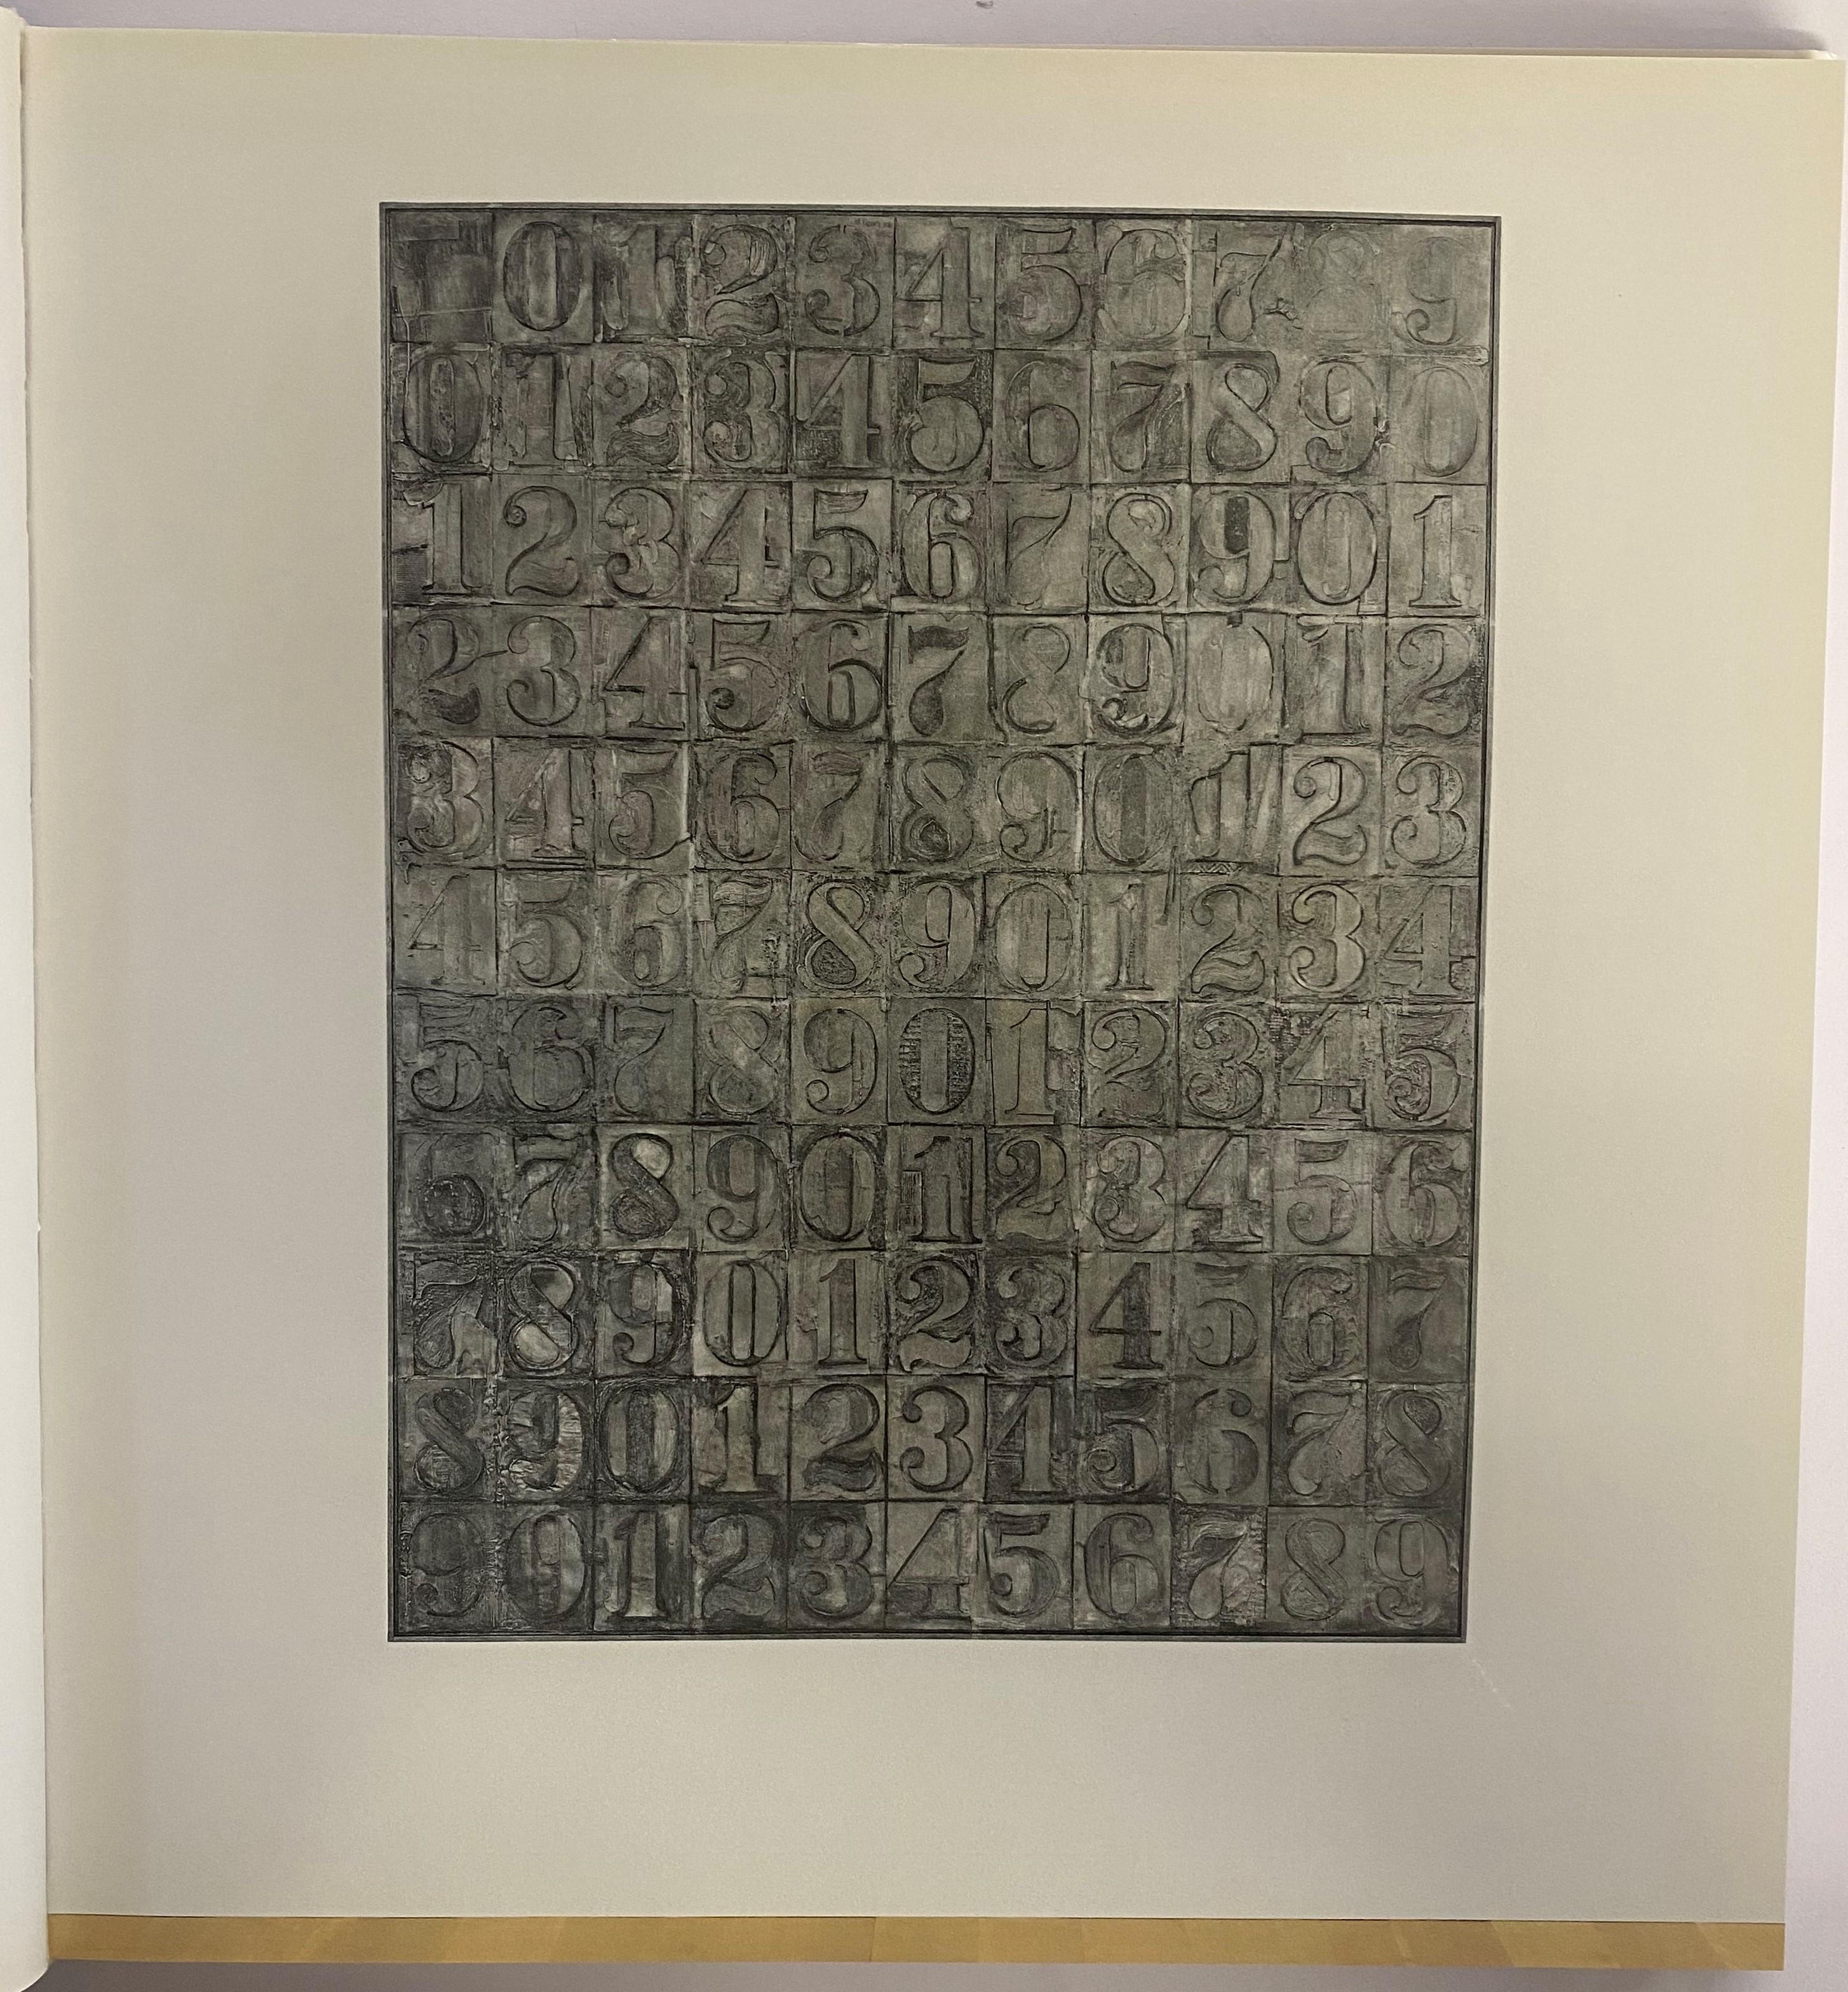 This monograph reproduces sculptures and works on paper completed over the last five years by Jasper Johns (born 1930), who in February 2011 became the first visual artist to receive a Presidential Medal of Honour since 1977. The sculptures, cast in